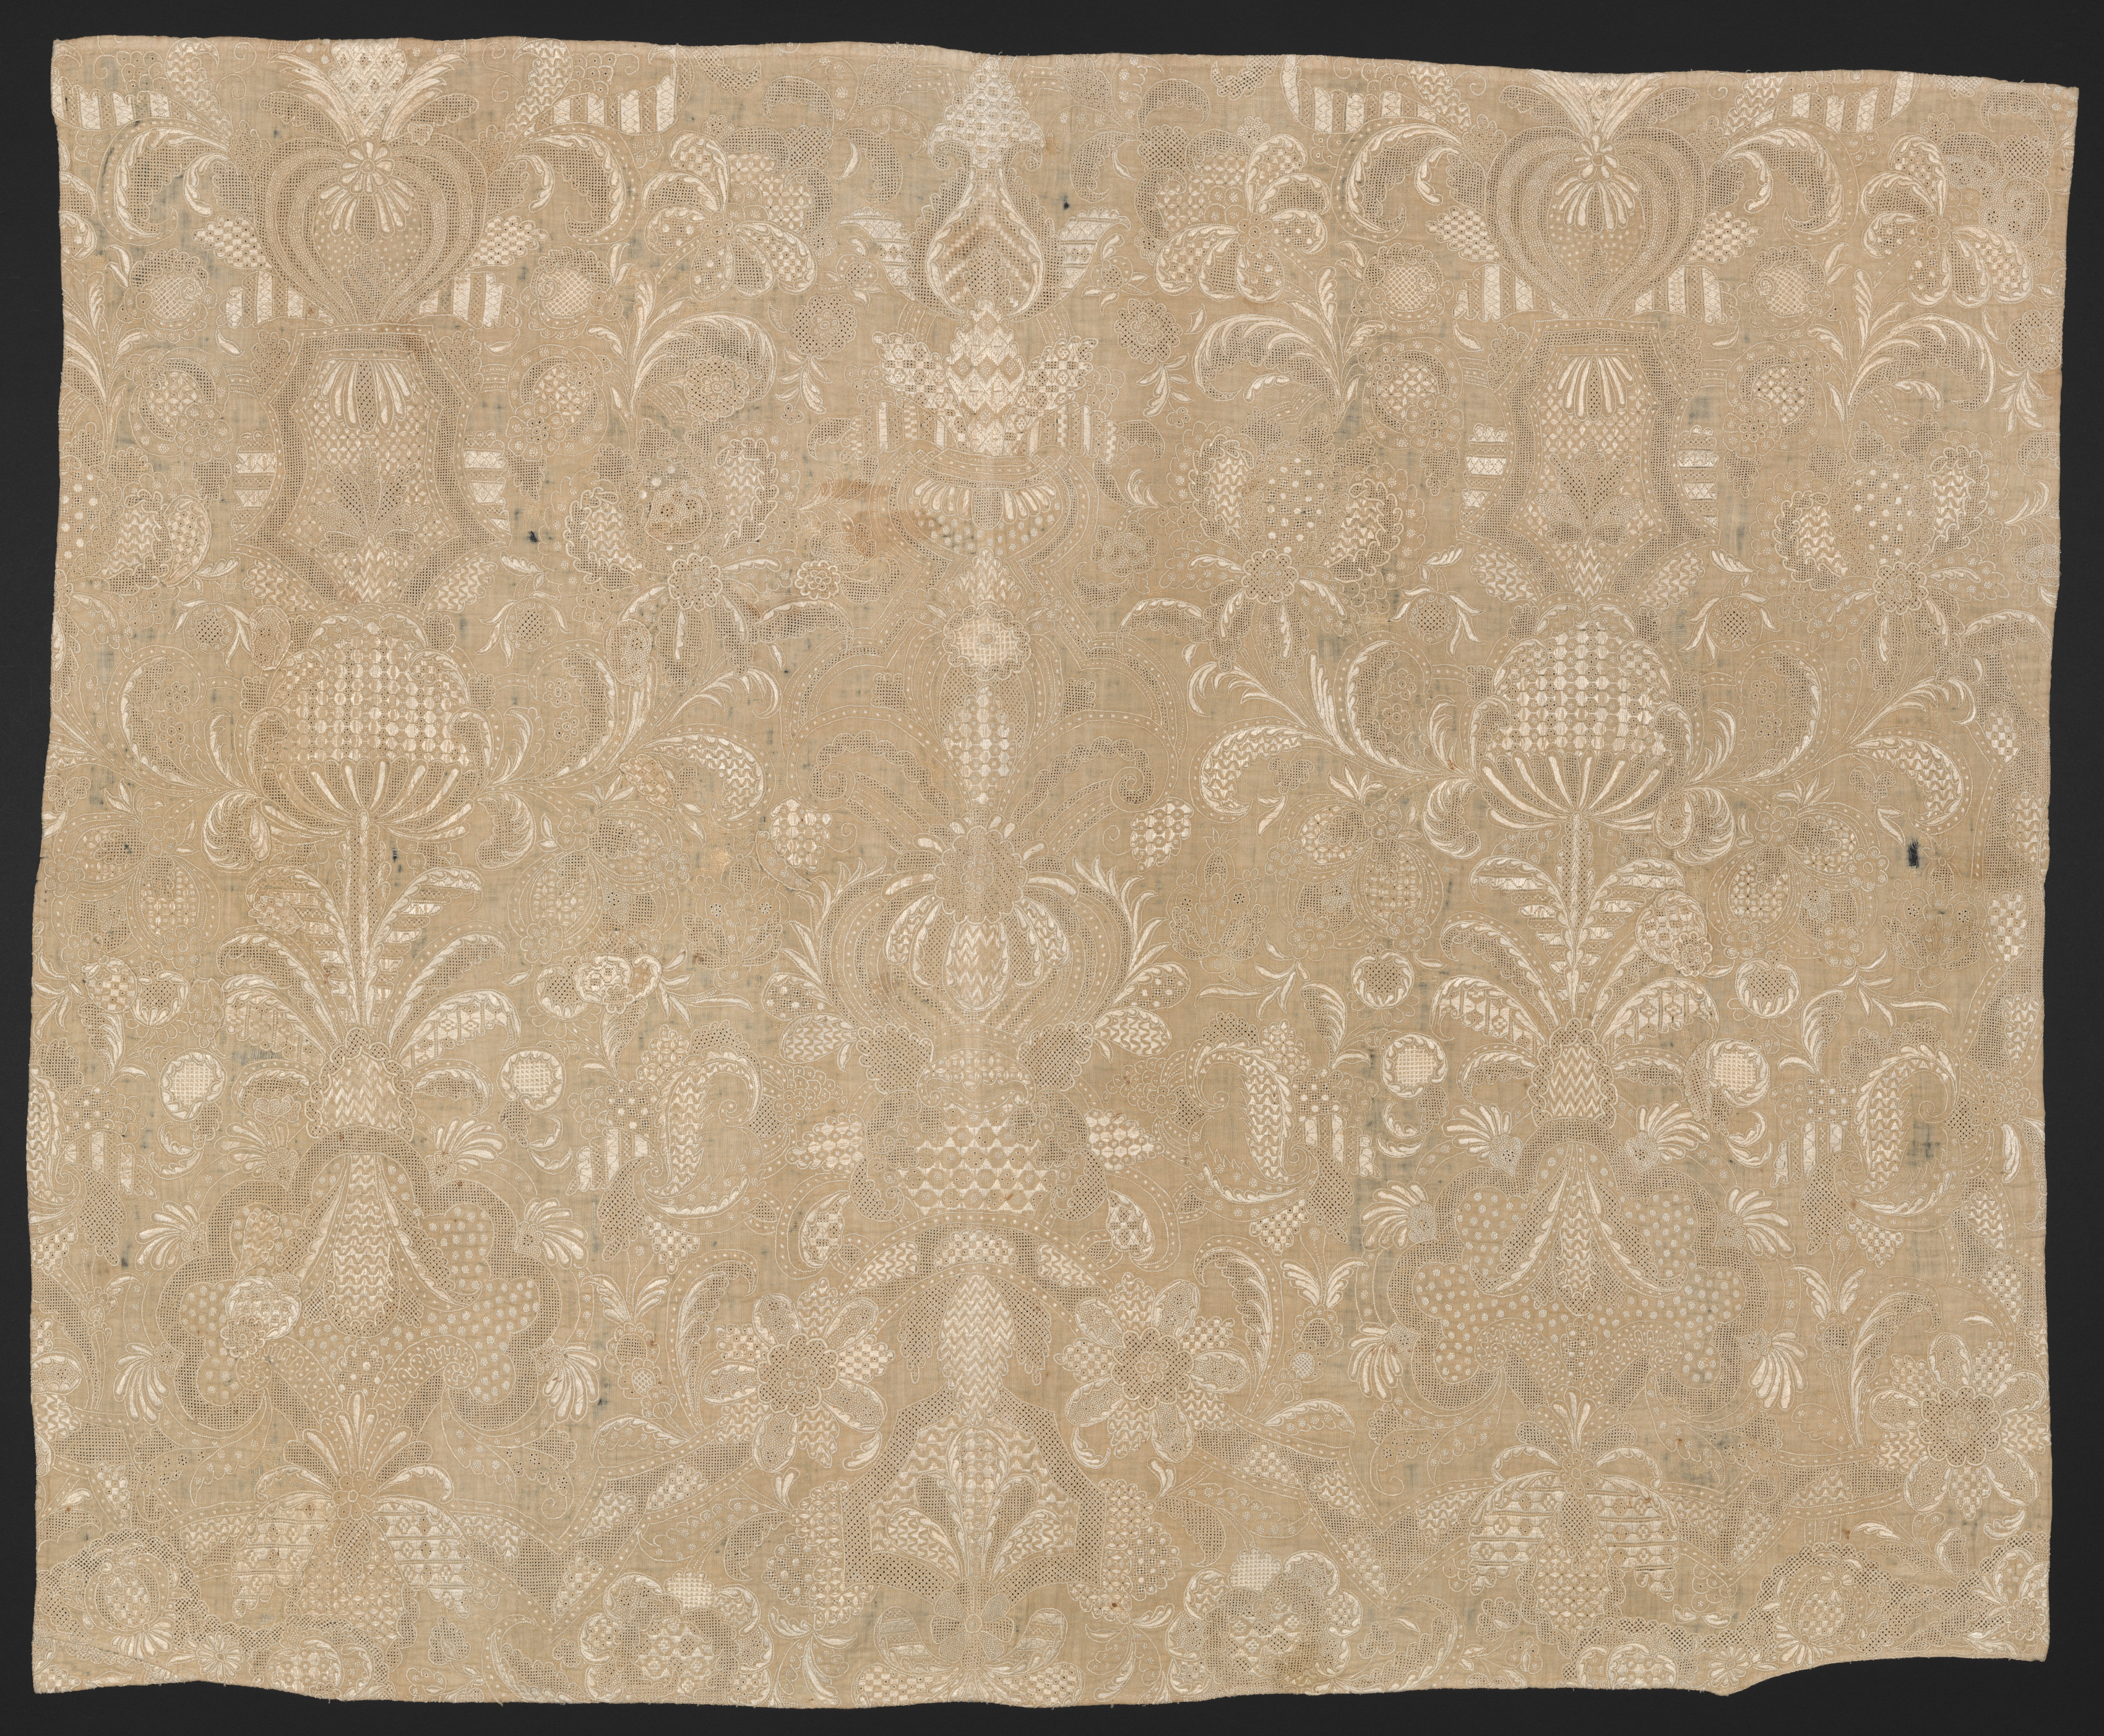 Fragment of Embroidered Cloth